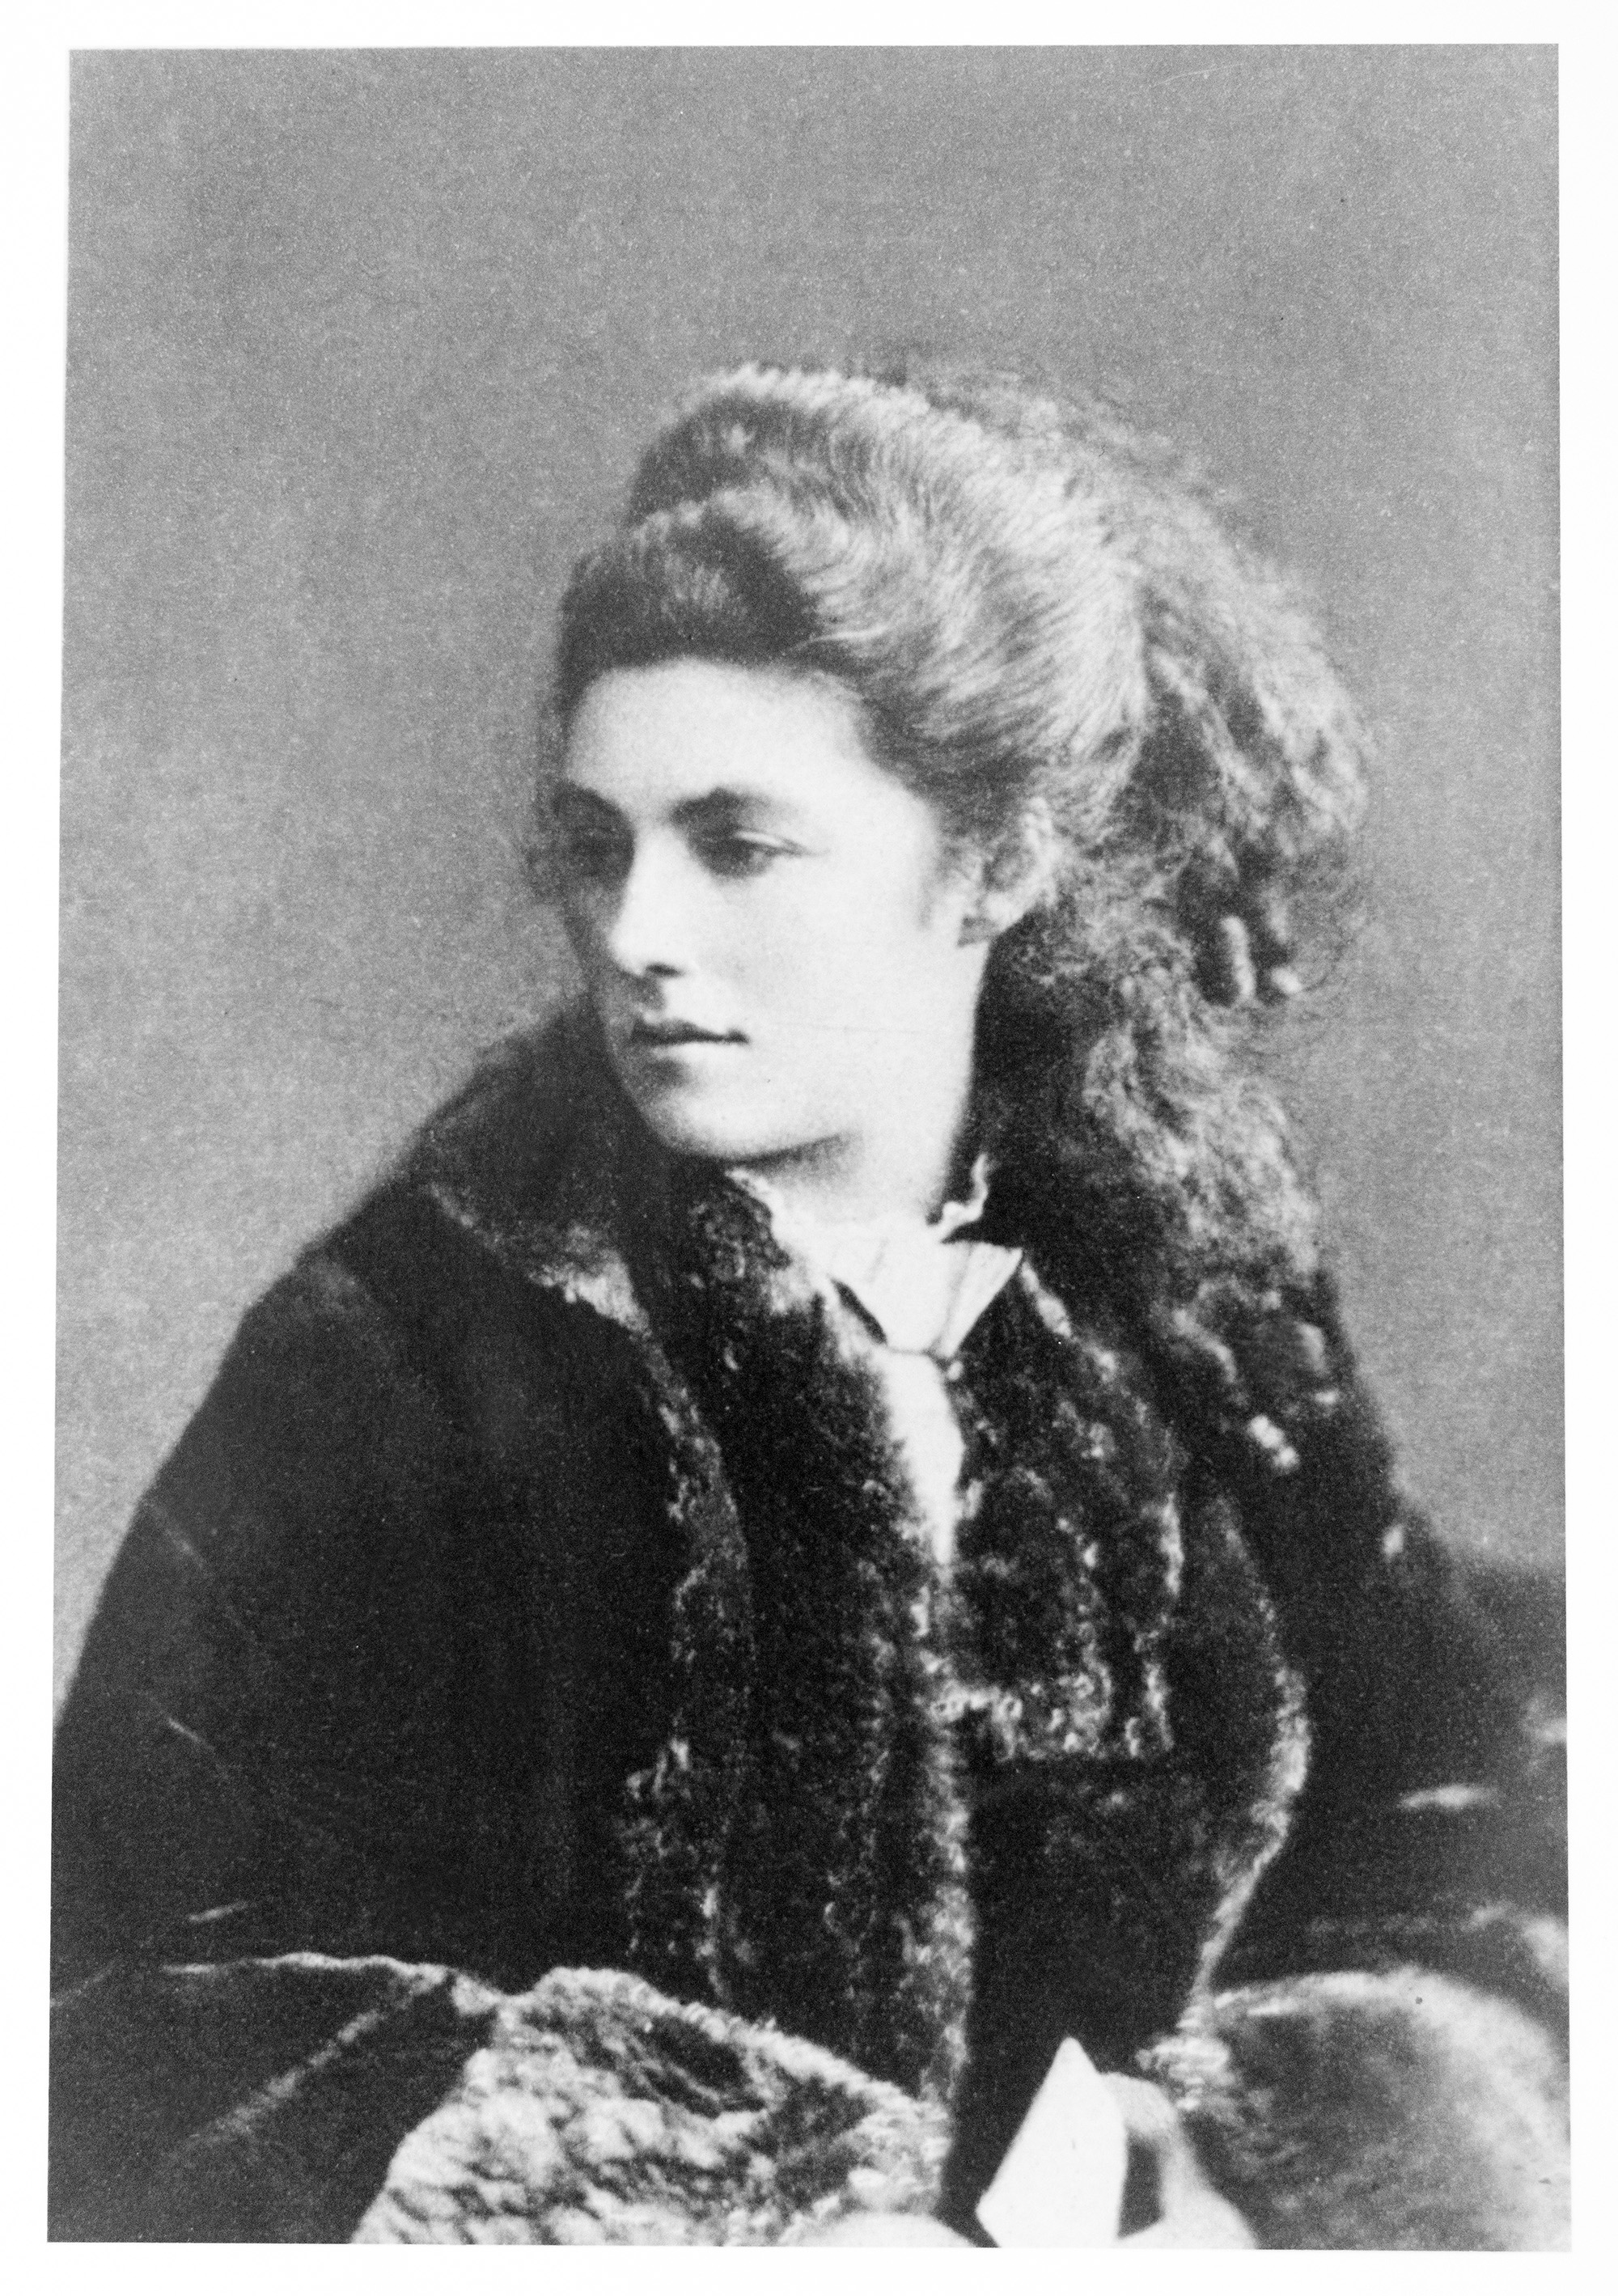 This photograph of Mathilde Blind shows her seated, and is taken from the waist up. Her head is turned slightly to the right, her body angled the left. She is wearing a large fur coat, and her sleeved arms are visible at the bottom of the photograph. She is holding a print object. Her hair is half pinned up, left ear visible, and the ends are curled into small ringlets.